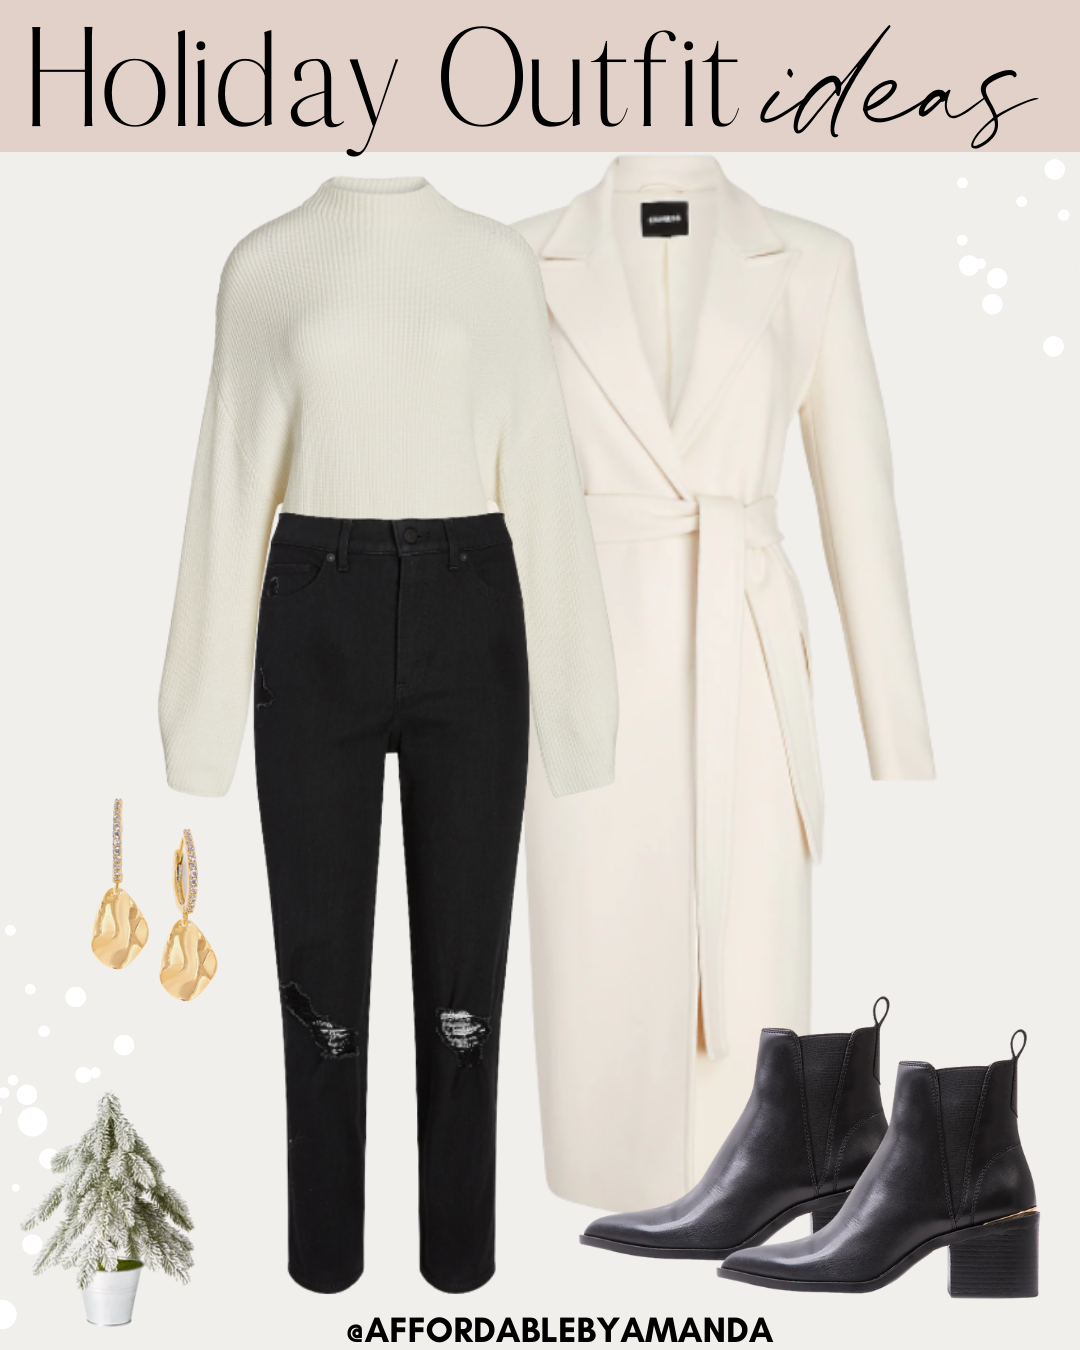 20 Holiday Outfit Ideas for 2020 - Affordable by Amanda